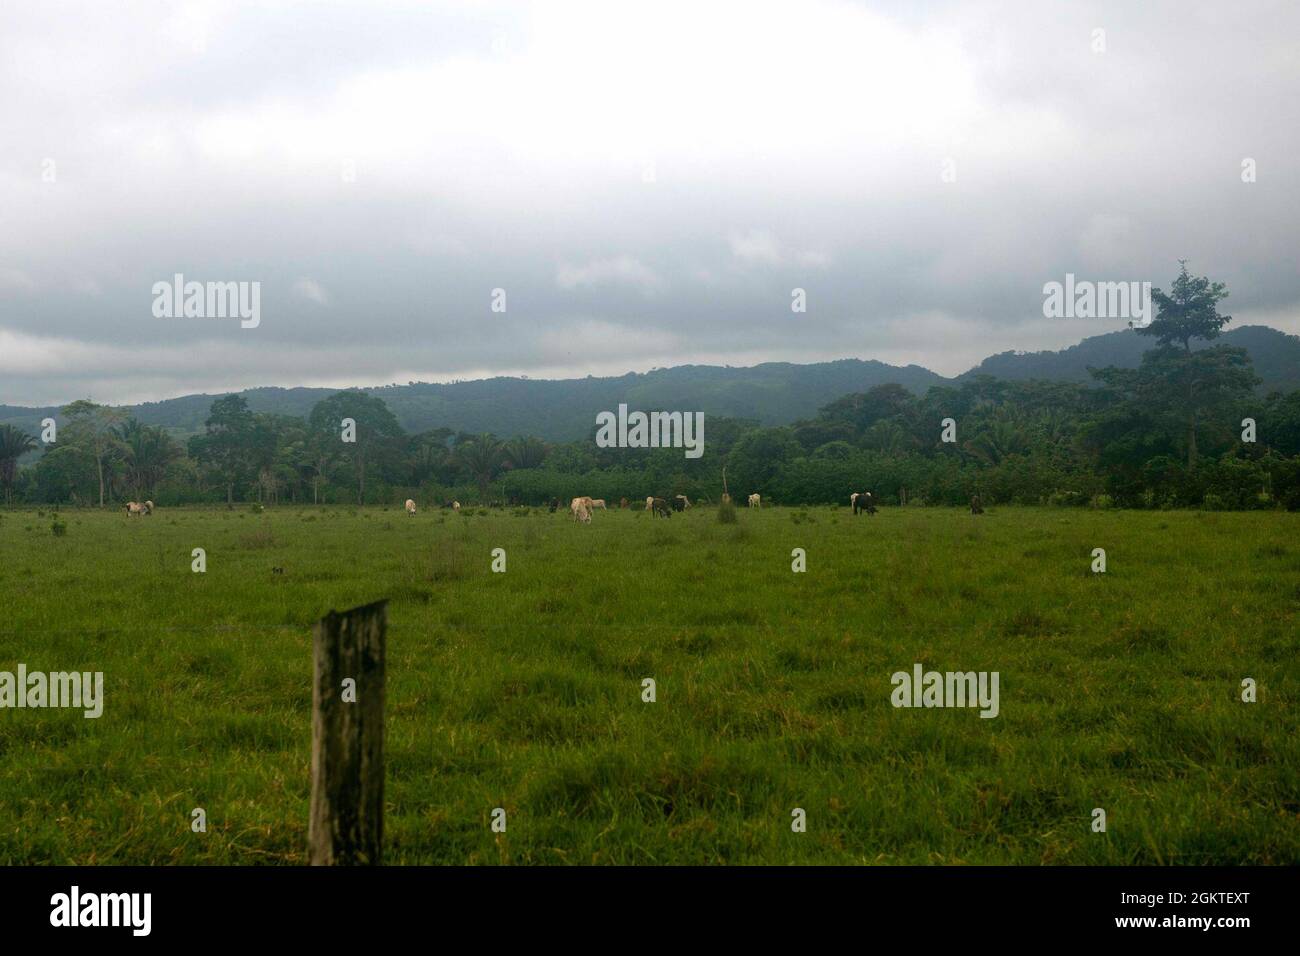 Cattle graze under a cloudy sky in Melchor De Mencos, Guatemala, June 29, 2021. During Resolute Sentinel 21, a team of U.S. Soldiers from the 109th Medical Detachment Veterinary Services out of Garden Grove, California, will offer large animal care education and vaccinations at various locations. Stock Photo